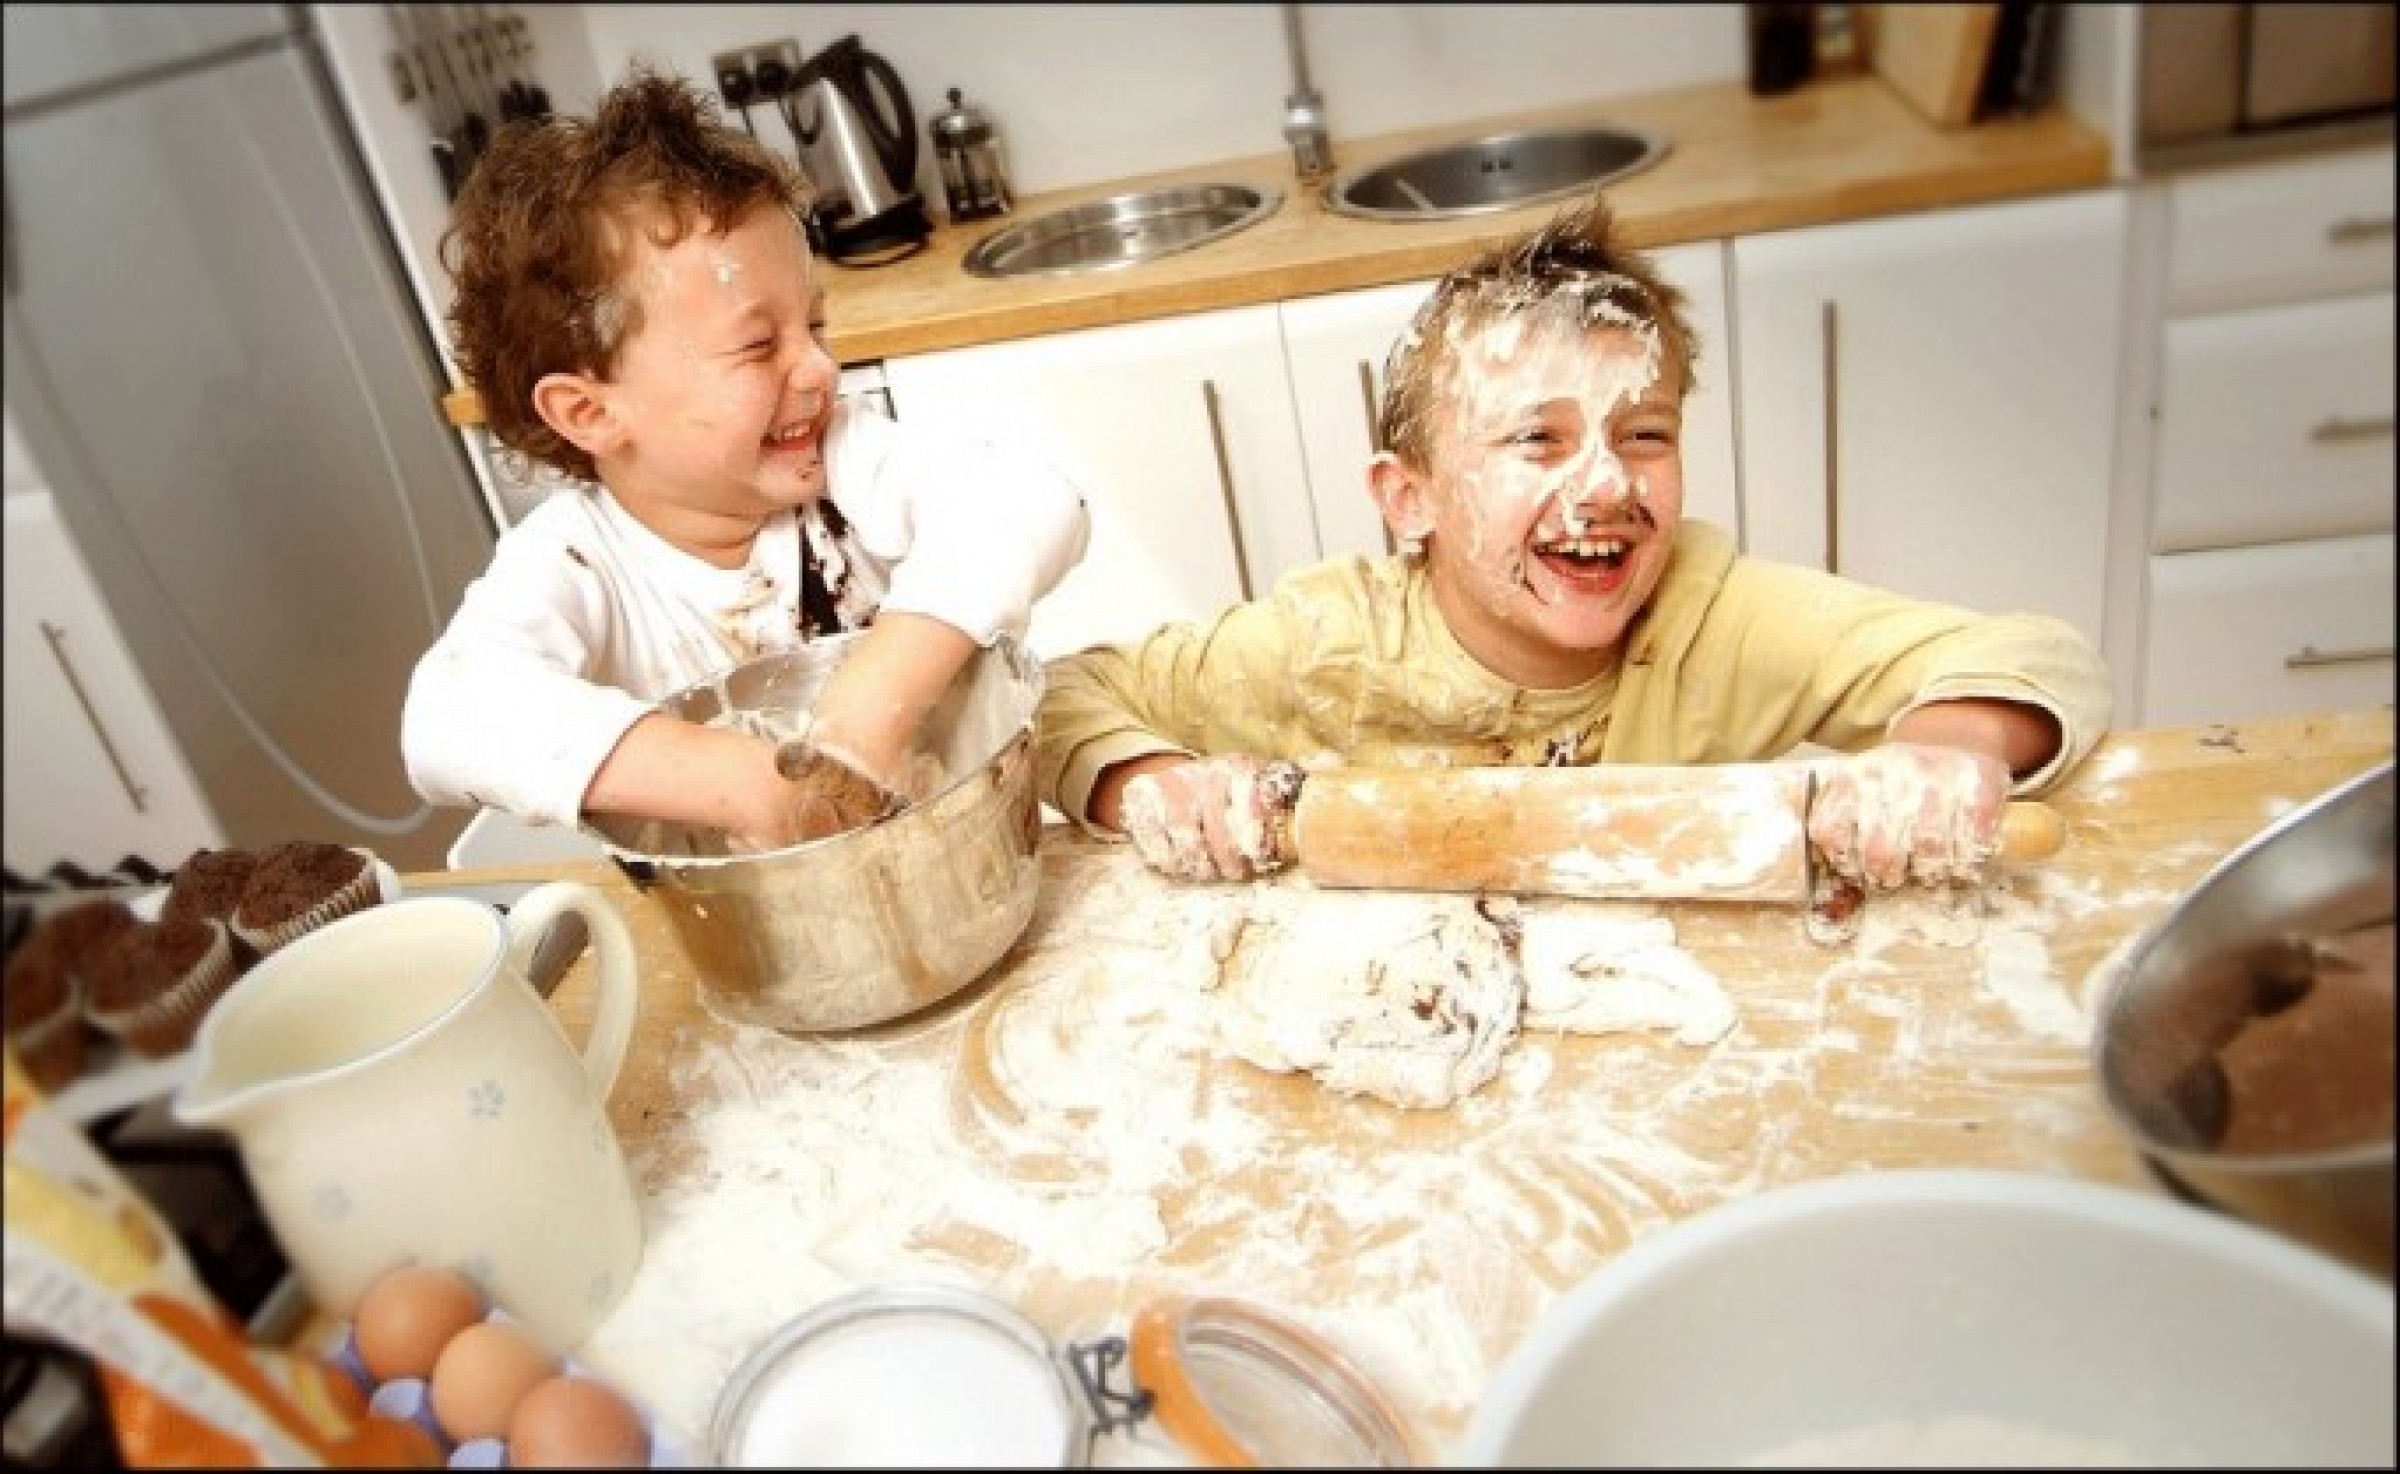 Messy Kids Cooking In Kitchen 2400x1474 C 